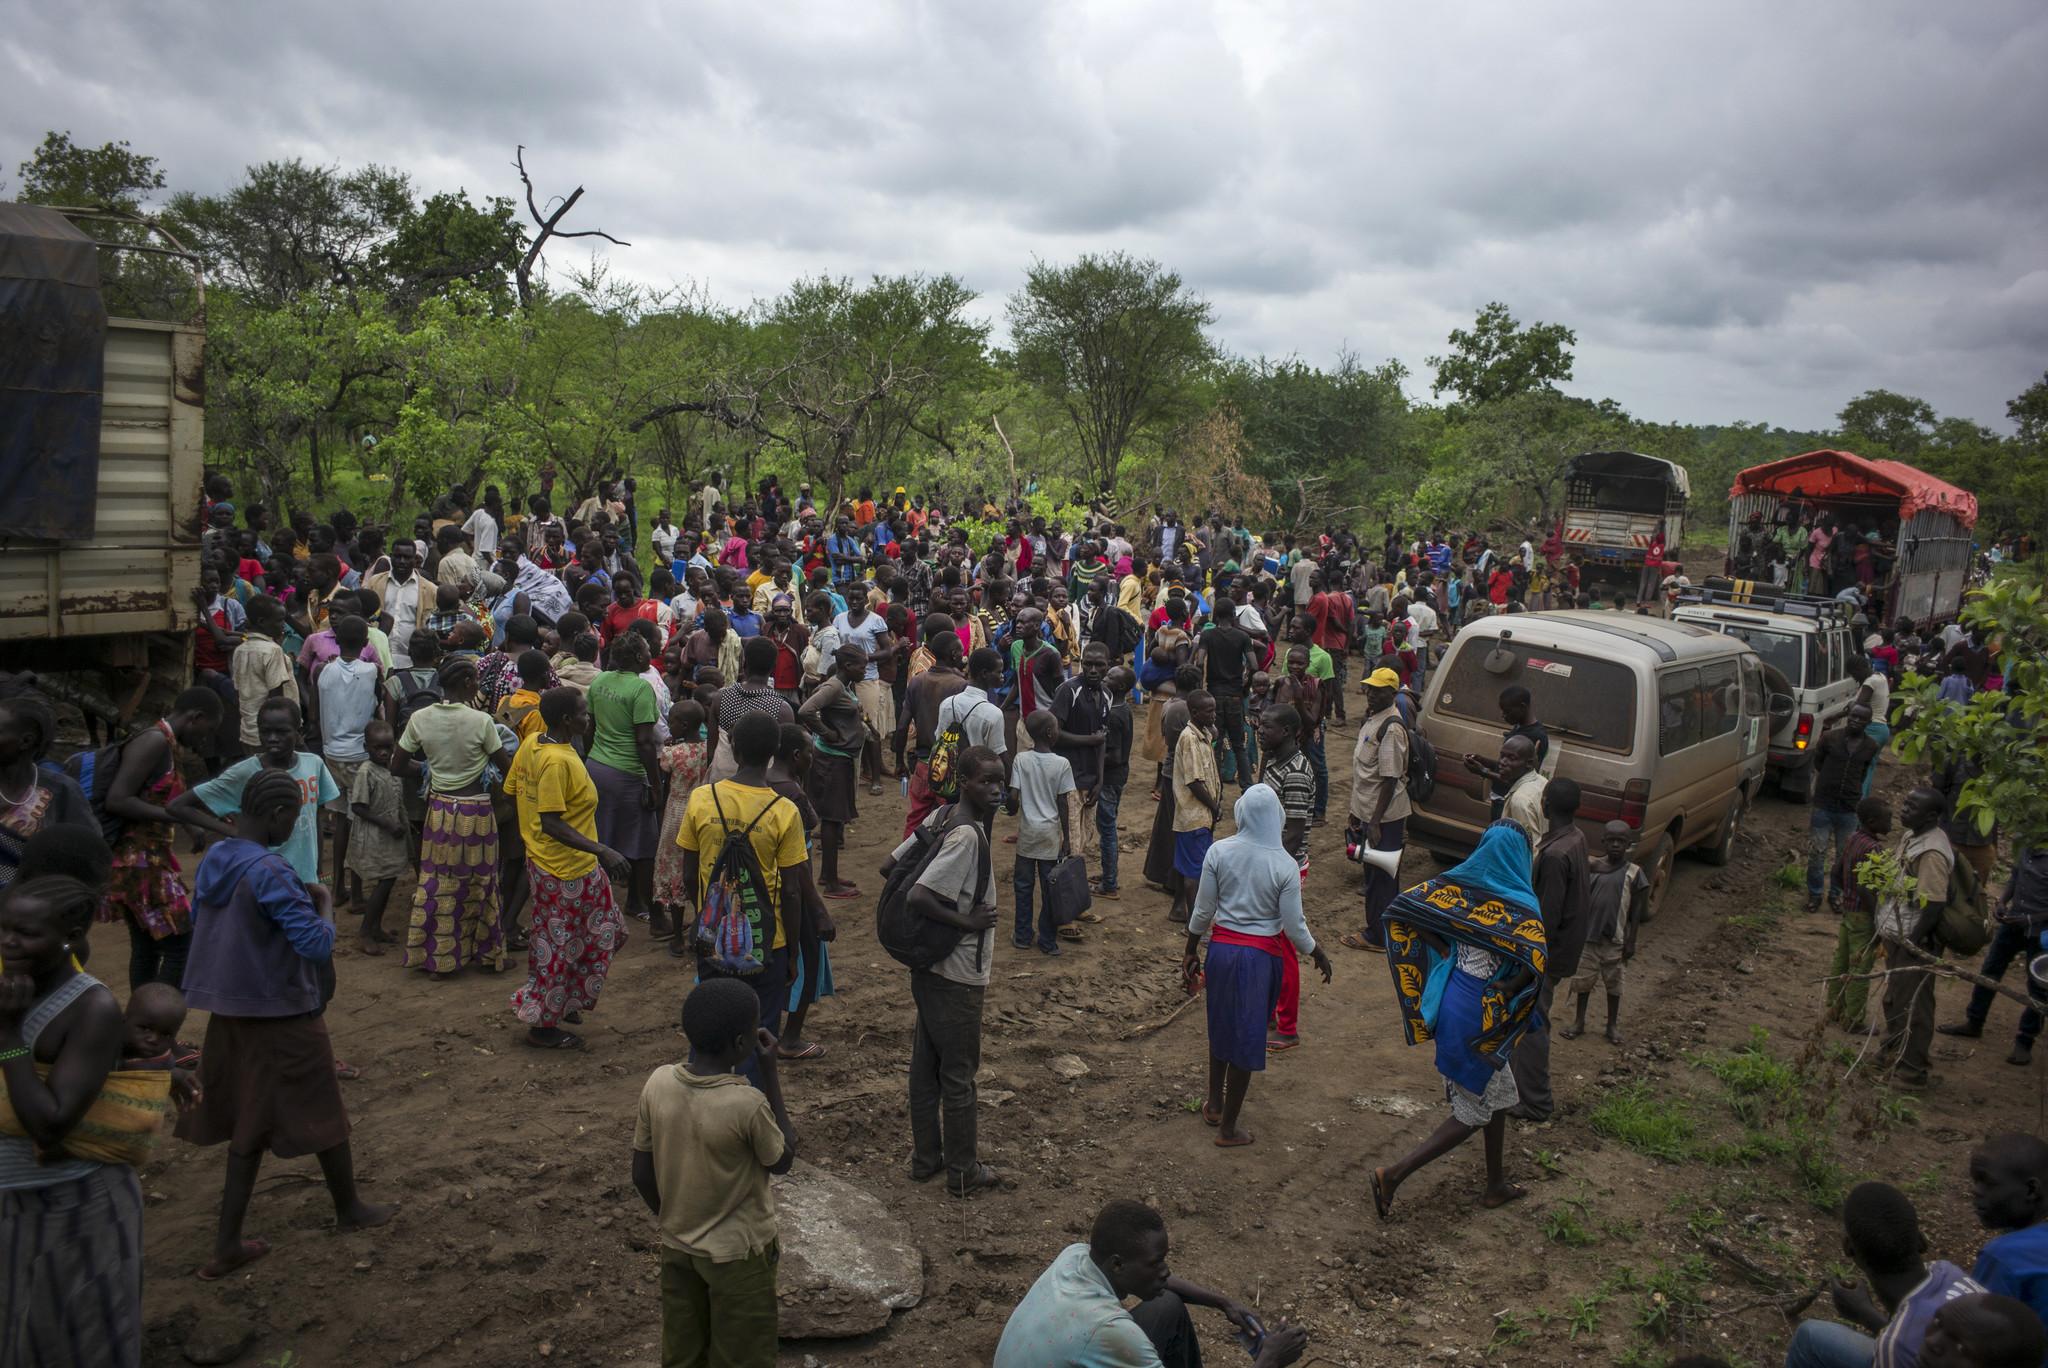 South Sudan refugees arriving in Imvepi settlement in northern Uganda, fleeing deadly war and hunger in their country, in 2017. Credit: Kieran Doherty/Oxfam.